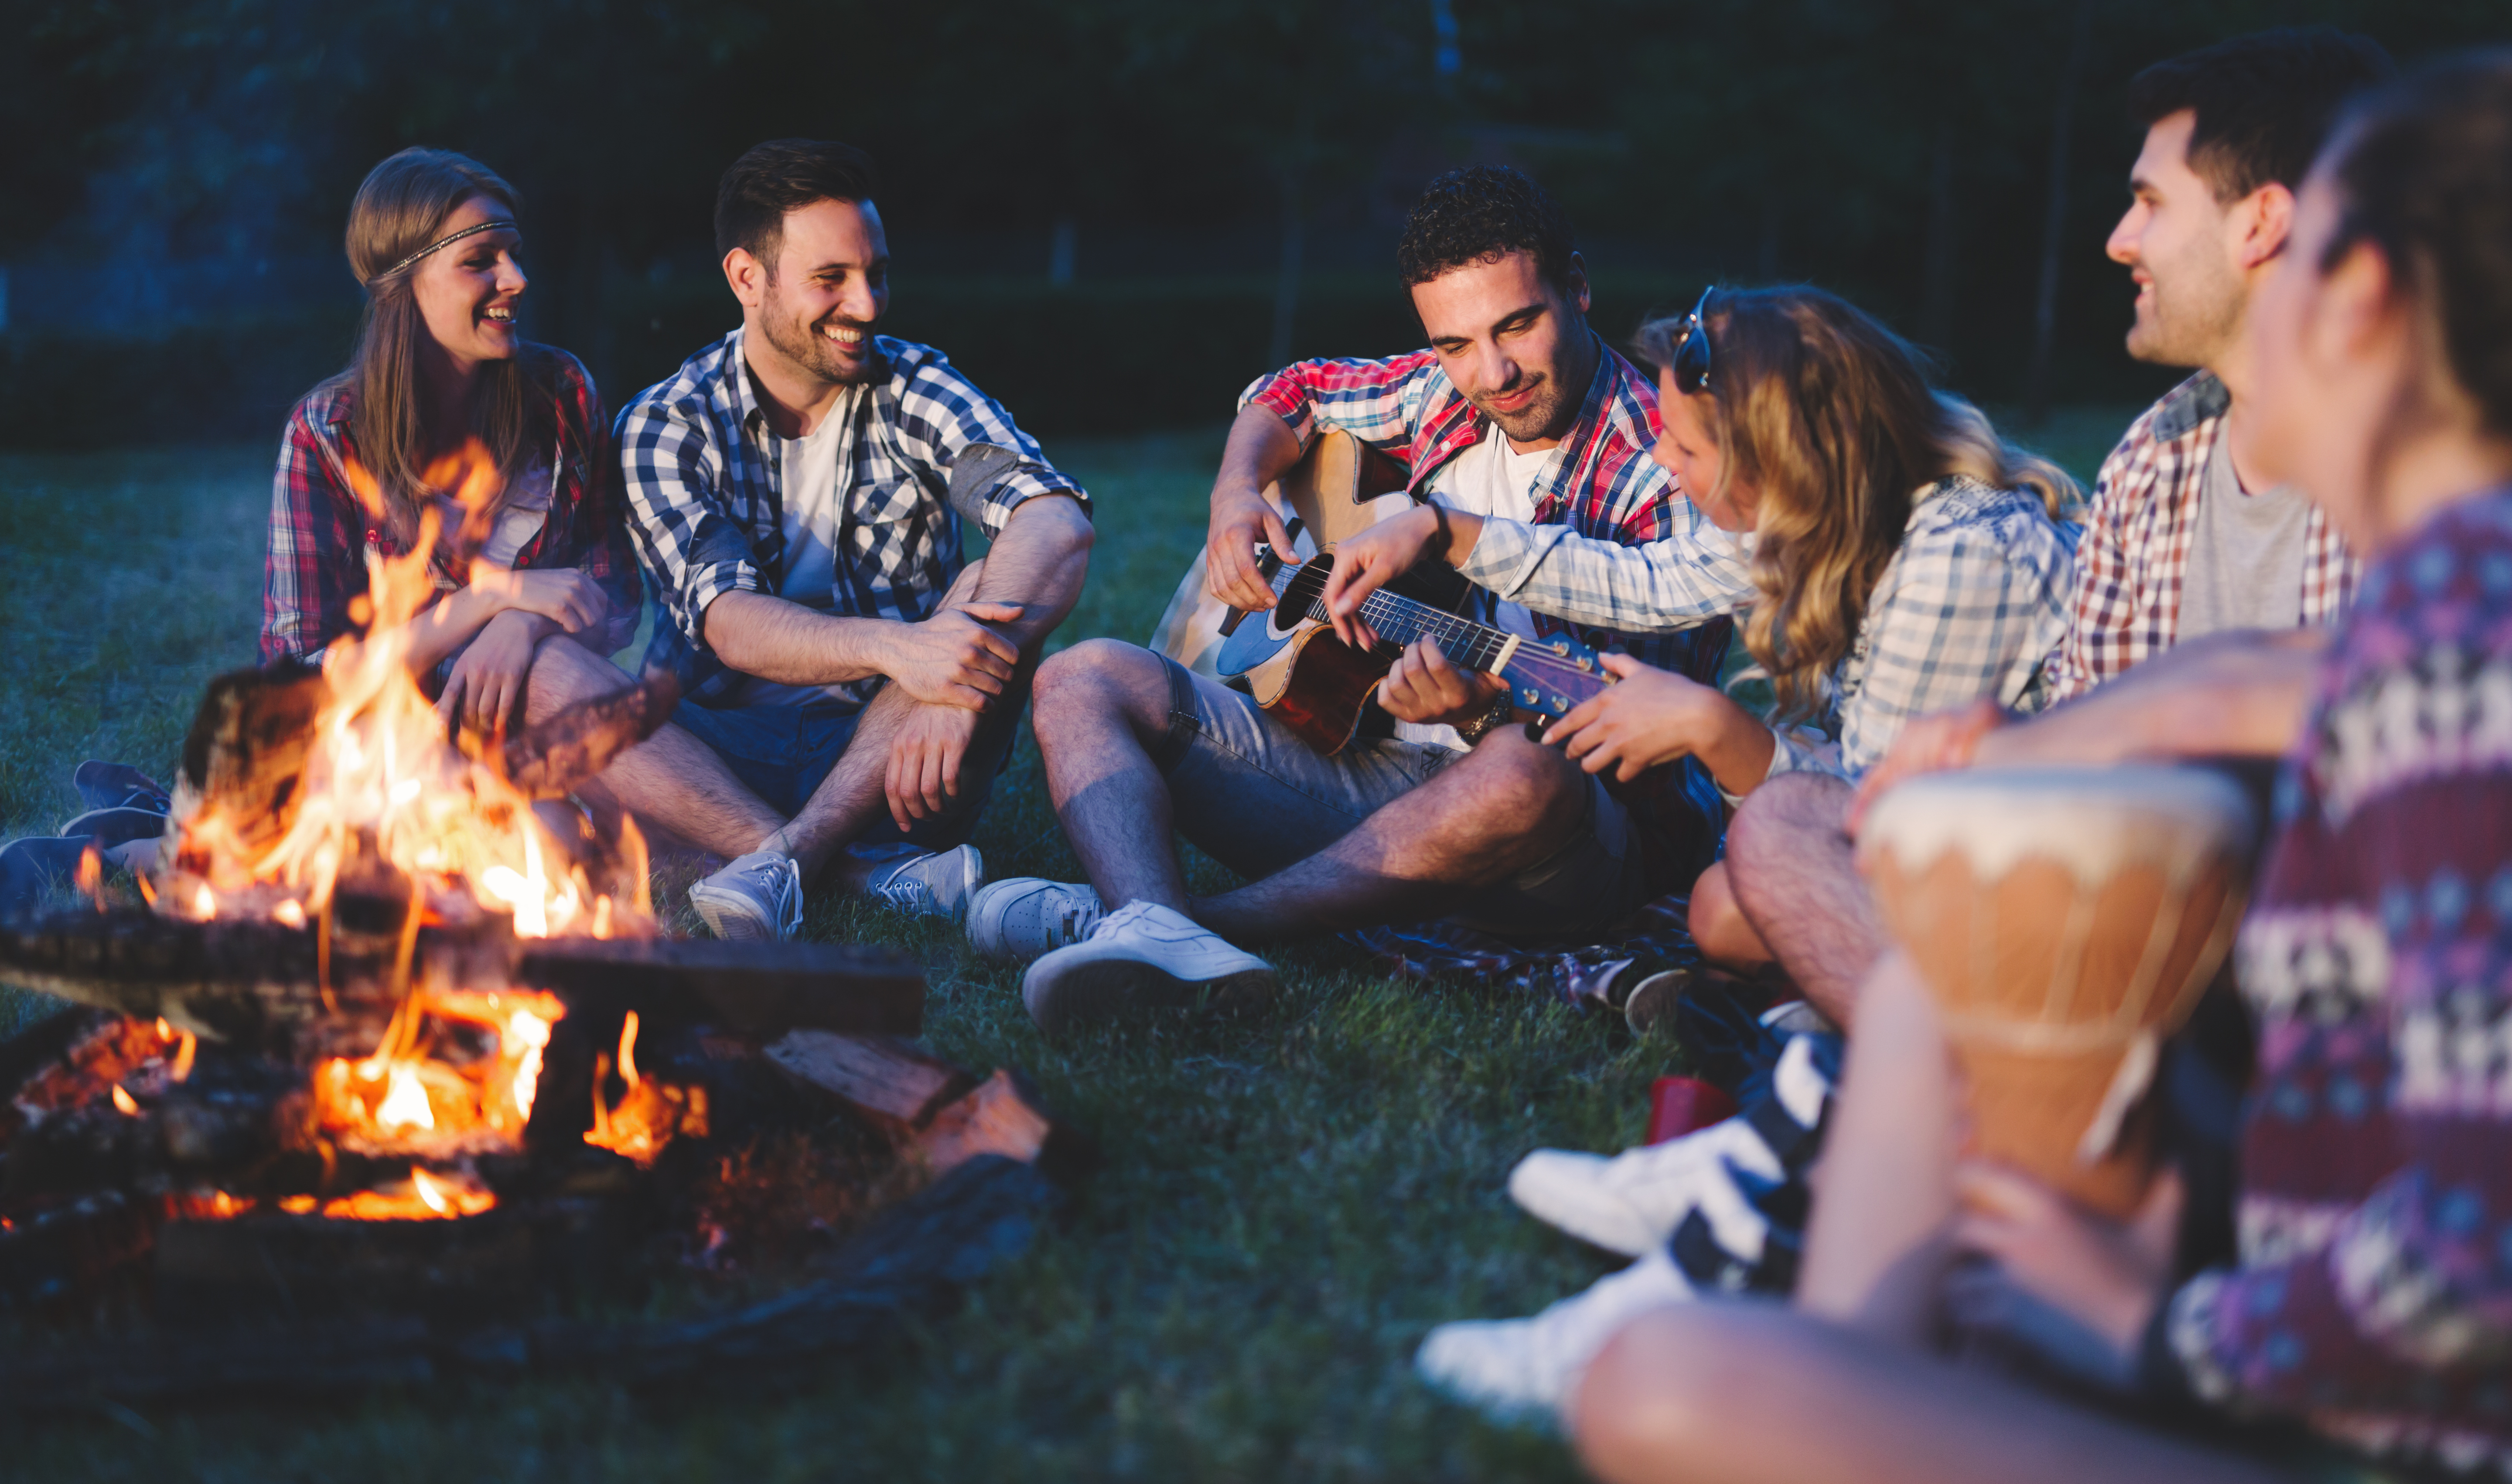 The Best RV Clubs for Making Friends on the Road